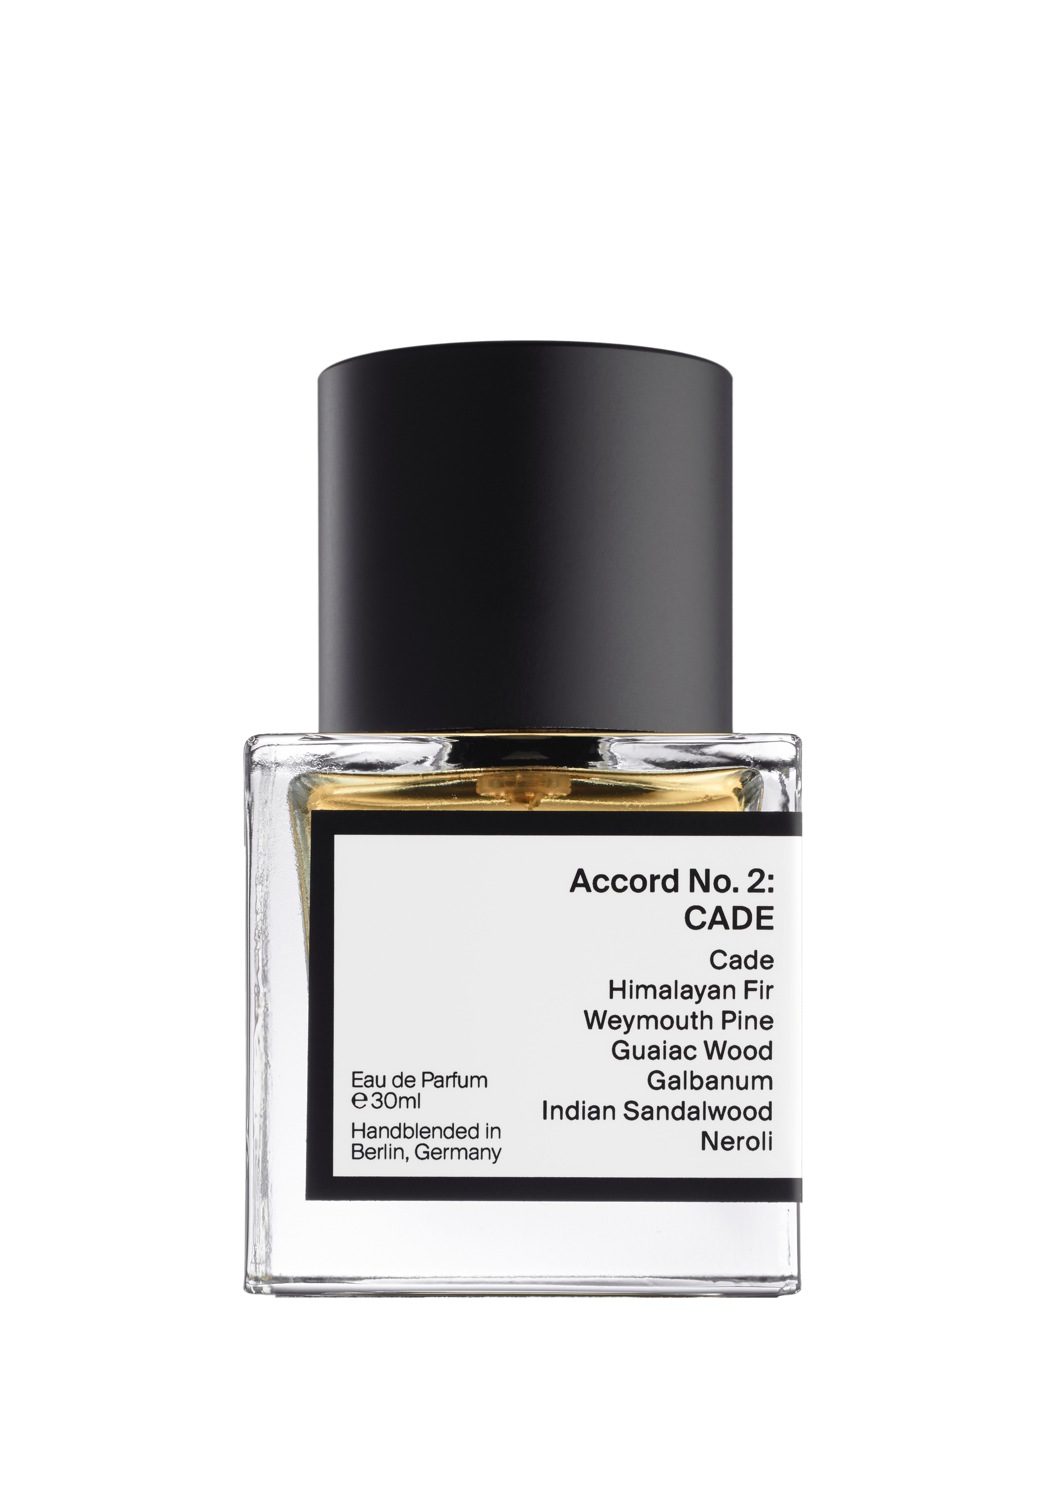 AER SCENTS handcrafted perfumes! Made in Berlin - KALTBLUT Magazine